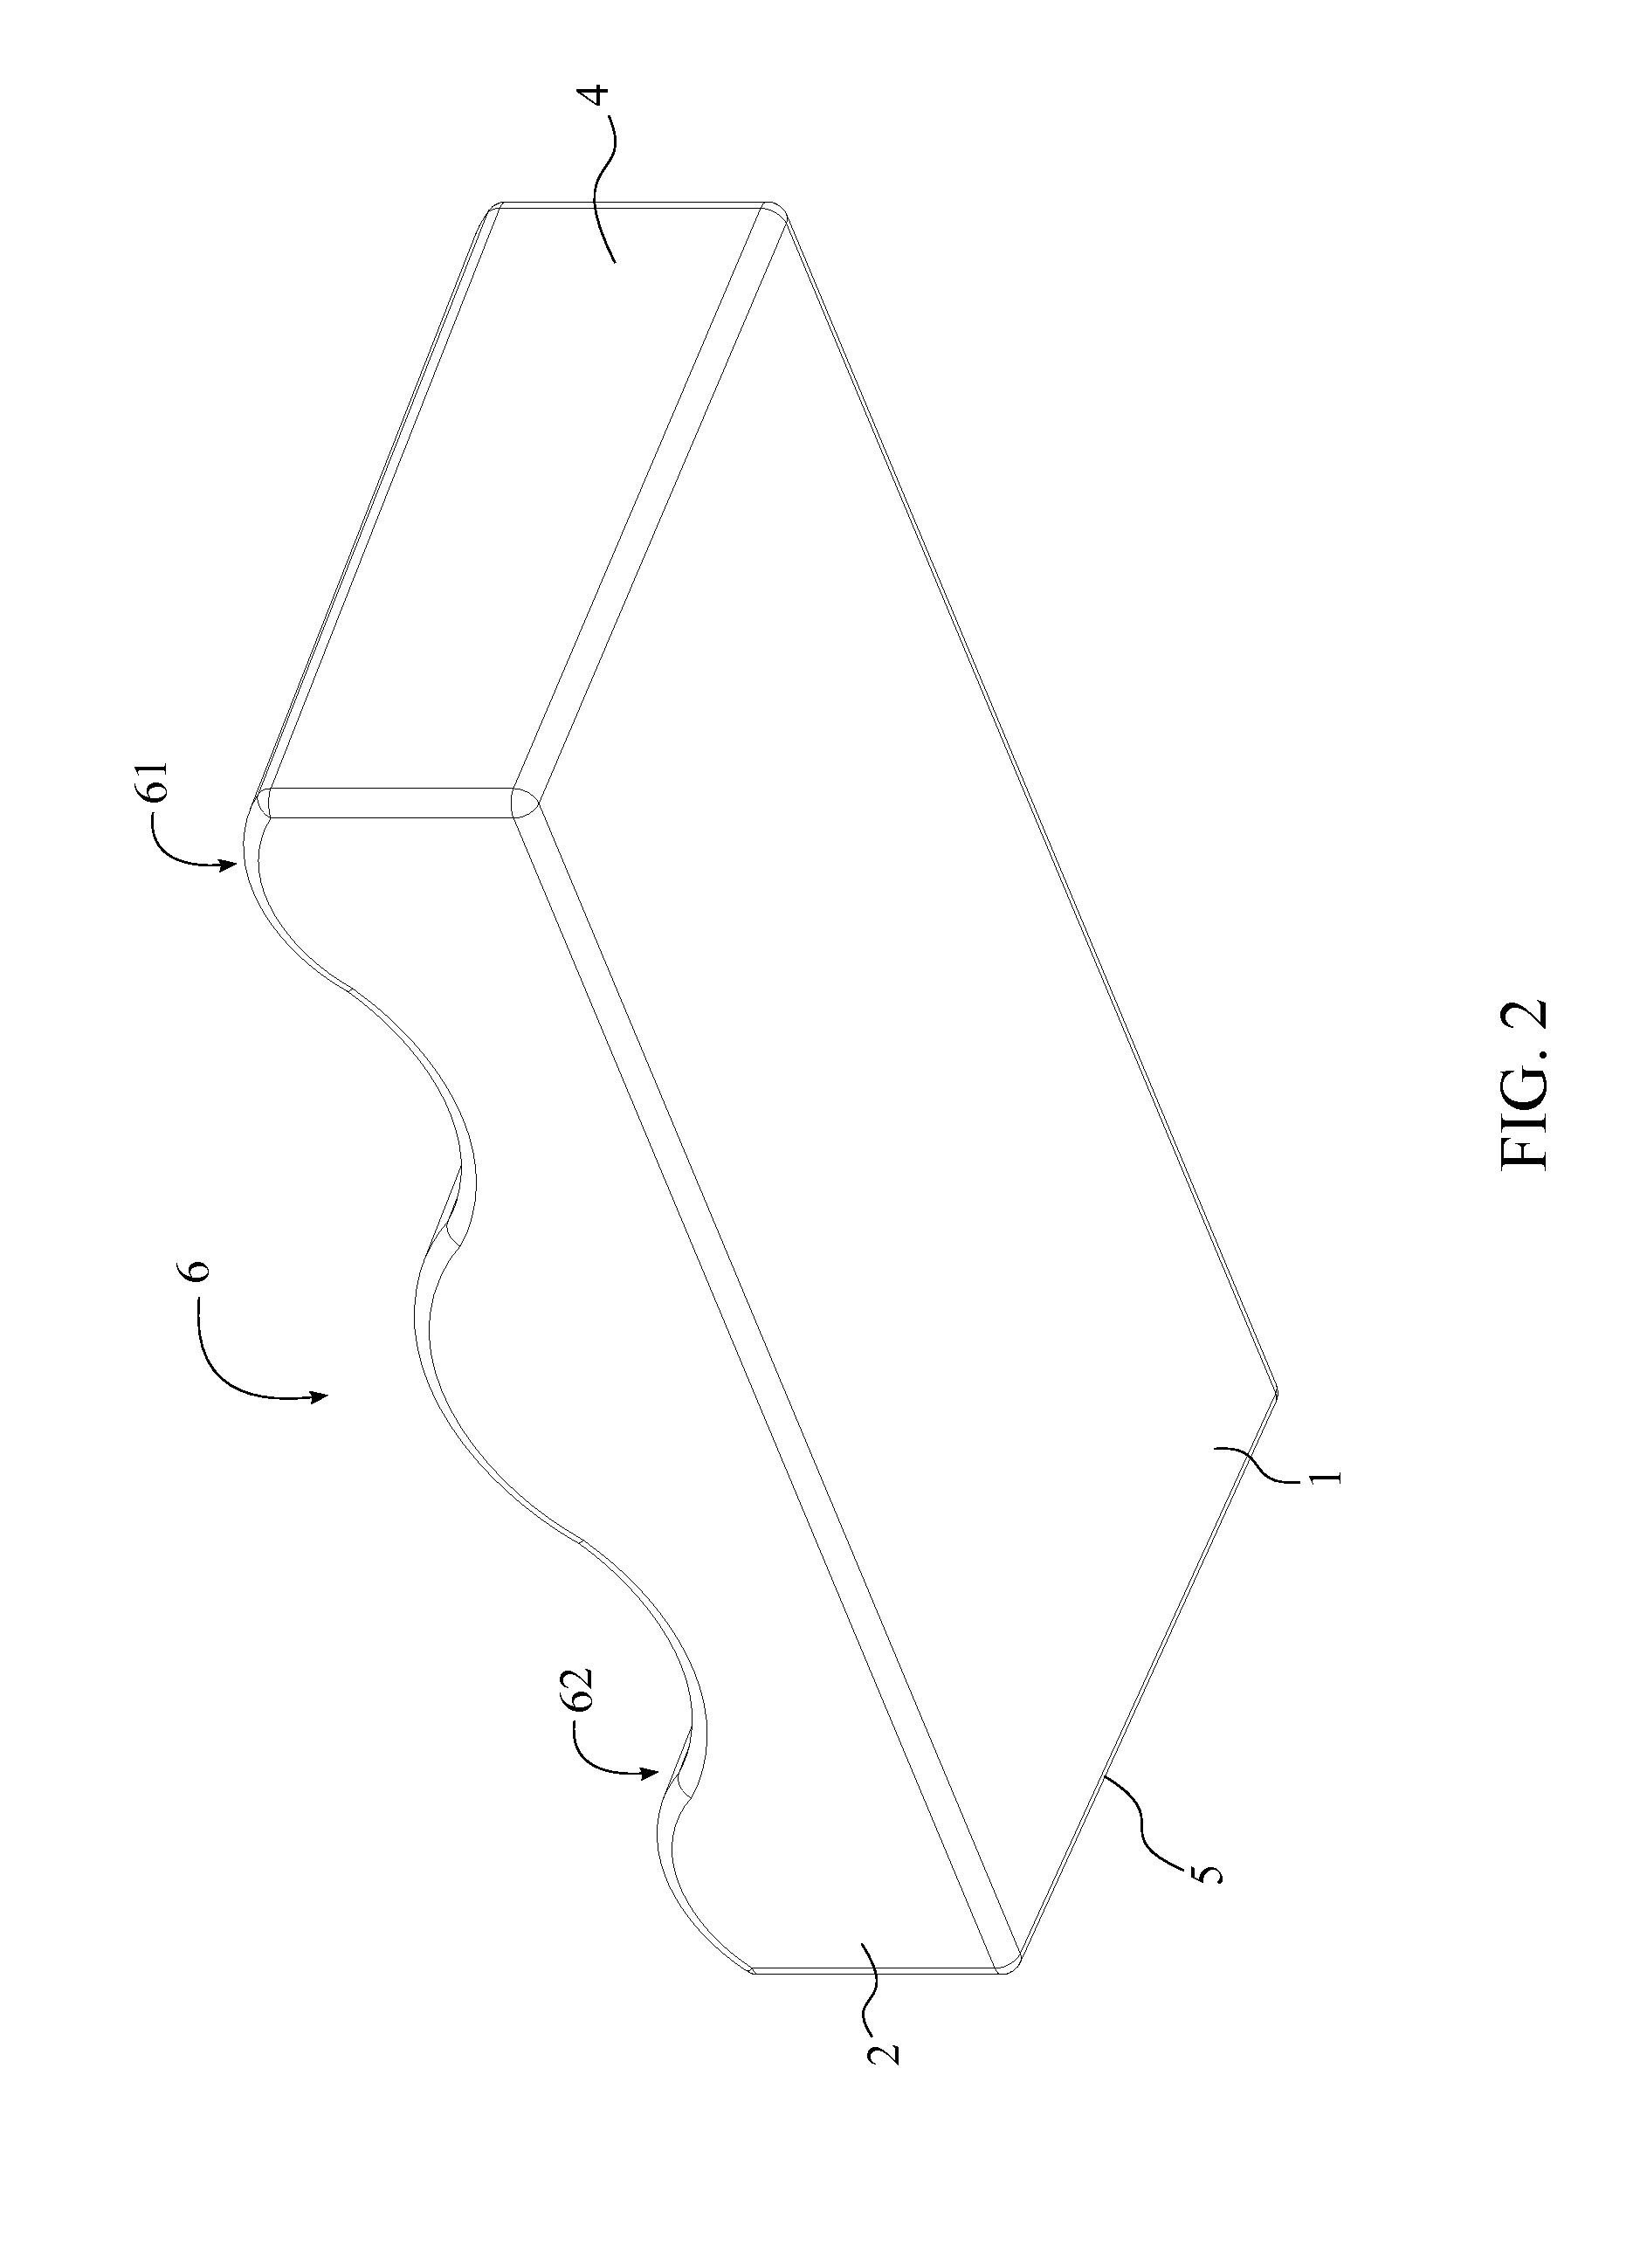 Supporting Pillow Apparatus for Relieving Pressure on Buttocks